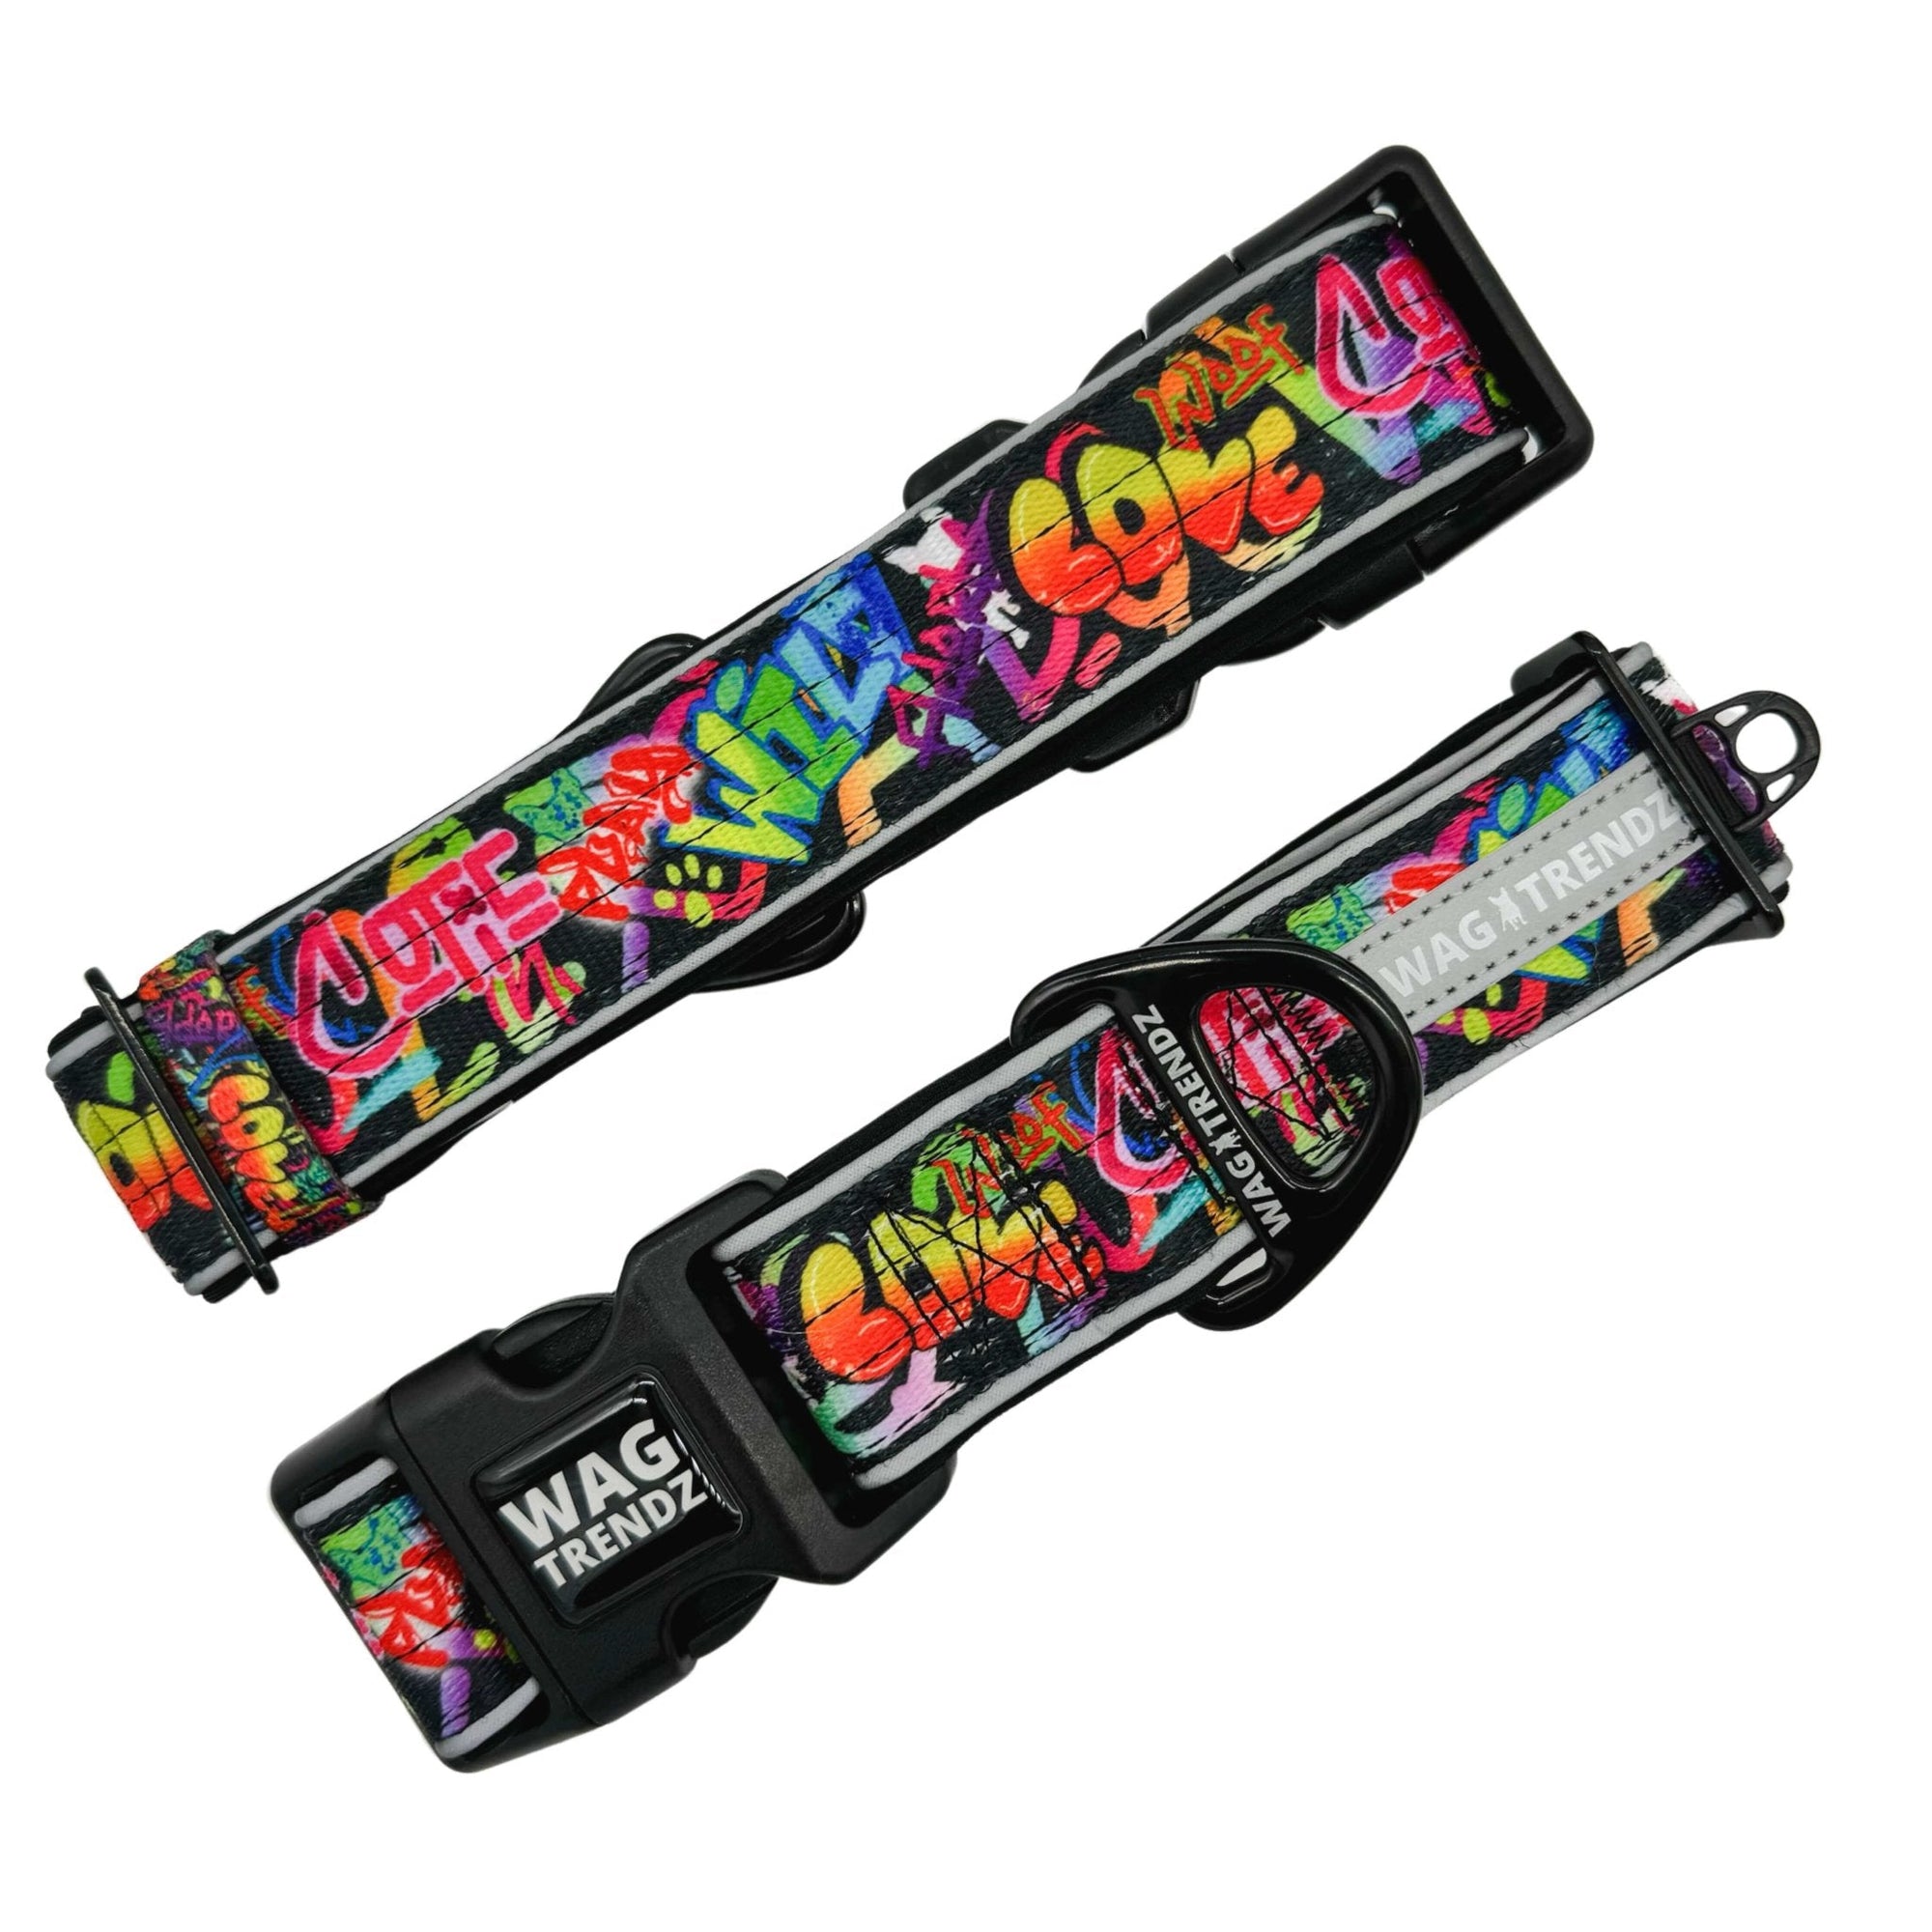 Reflective Dog Collar - Multicolored Street Graffiti Reflective Dog Collar - front and back view - against solid white background - Wag Trendz